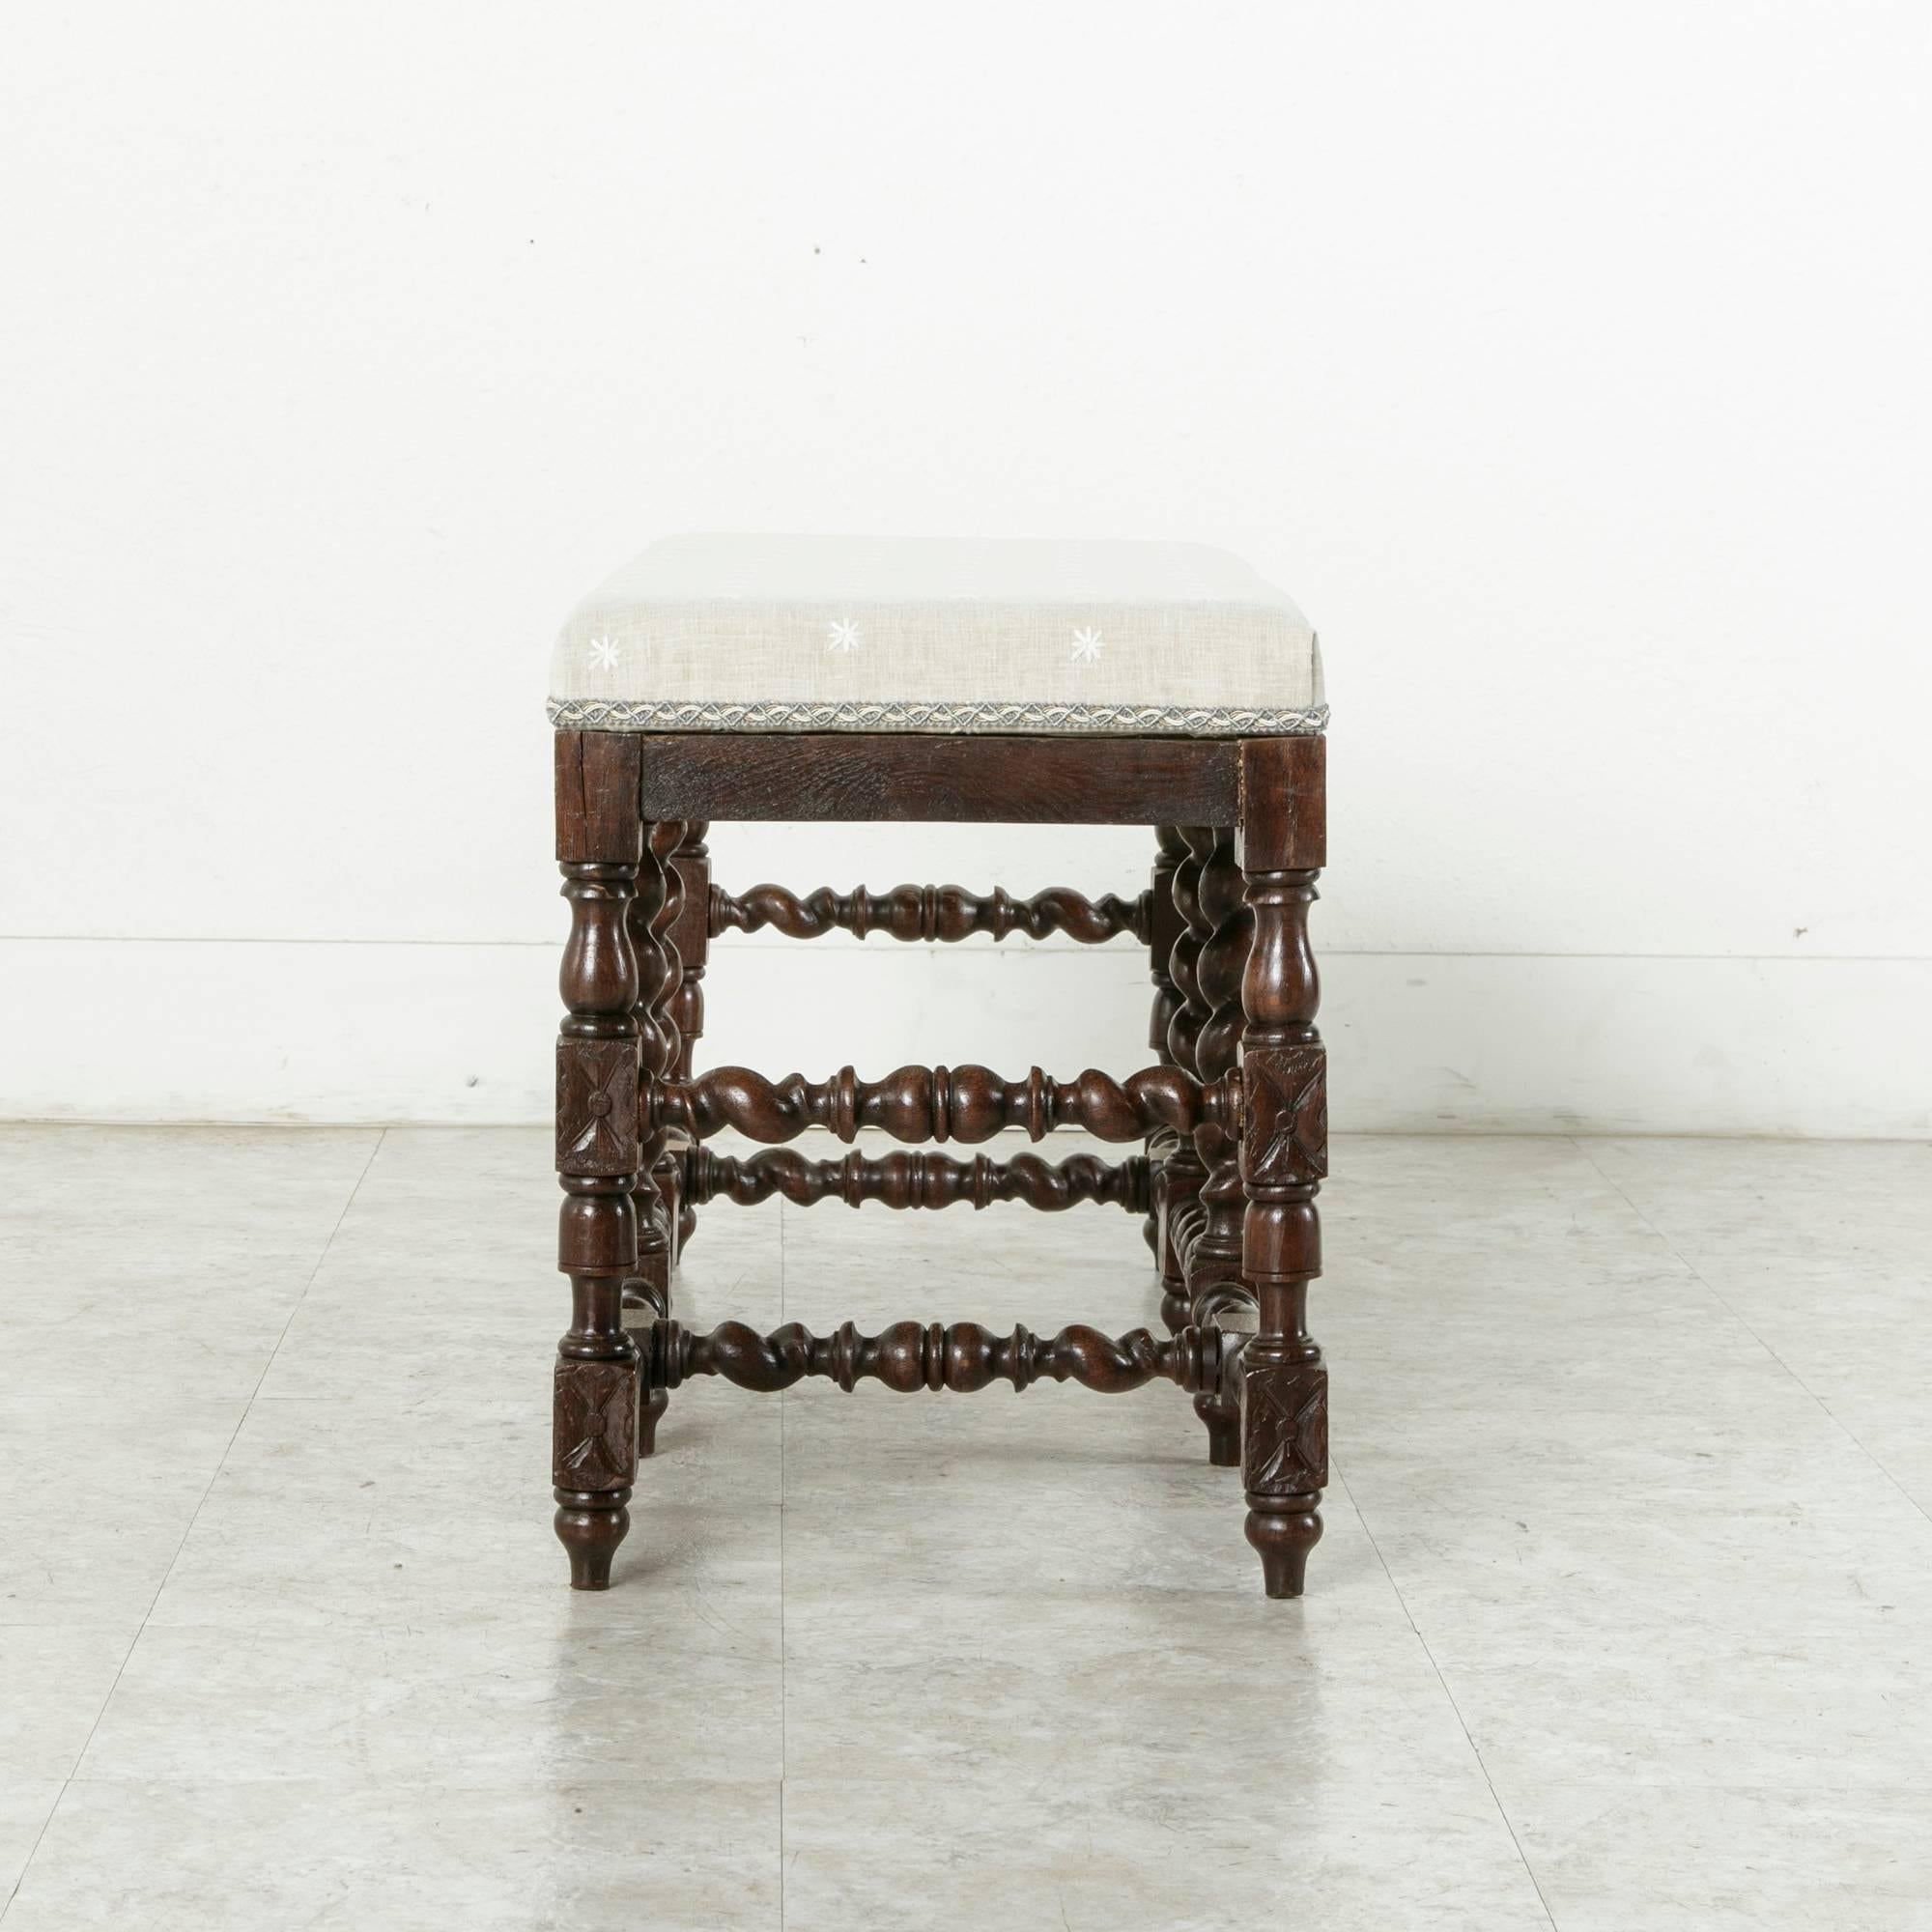 Early 20th Century Hand-Carved French Oak Benches with Barley Twist Legs and Stretchers, circa 1900